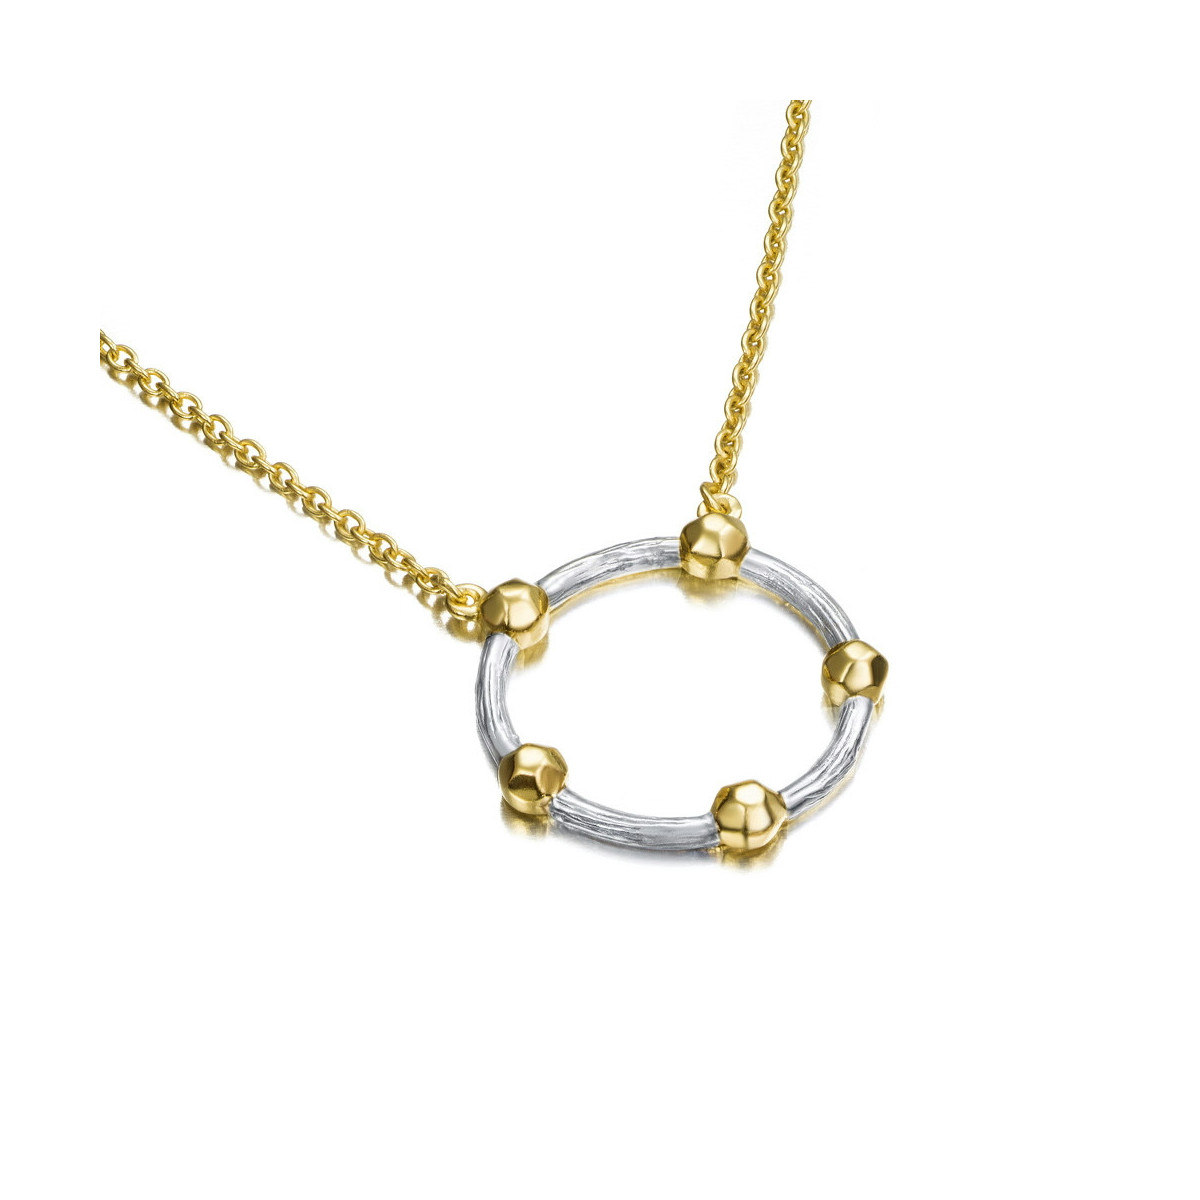 CELESTIAL Necklace in Silver. 18k Gold Vermeil